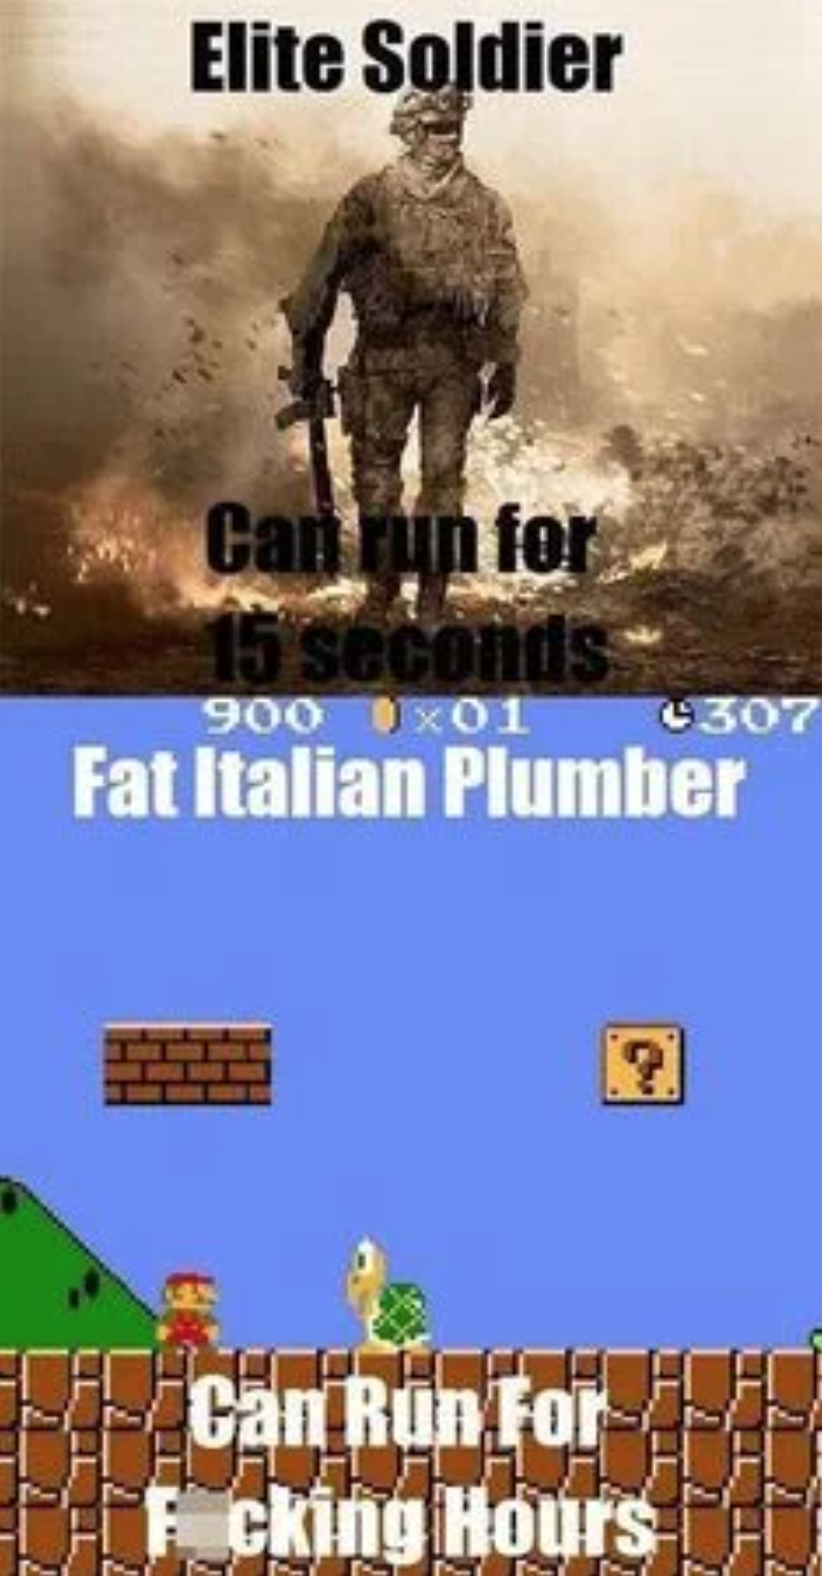 funny gaming memes - video game logic memes - Elite Soldier Can run for 15 seconds 900 x01 1307 Fat Italian Plumber ch Can Run For Ecking Hours M